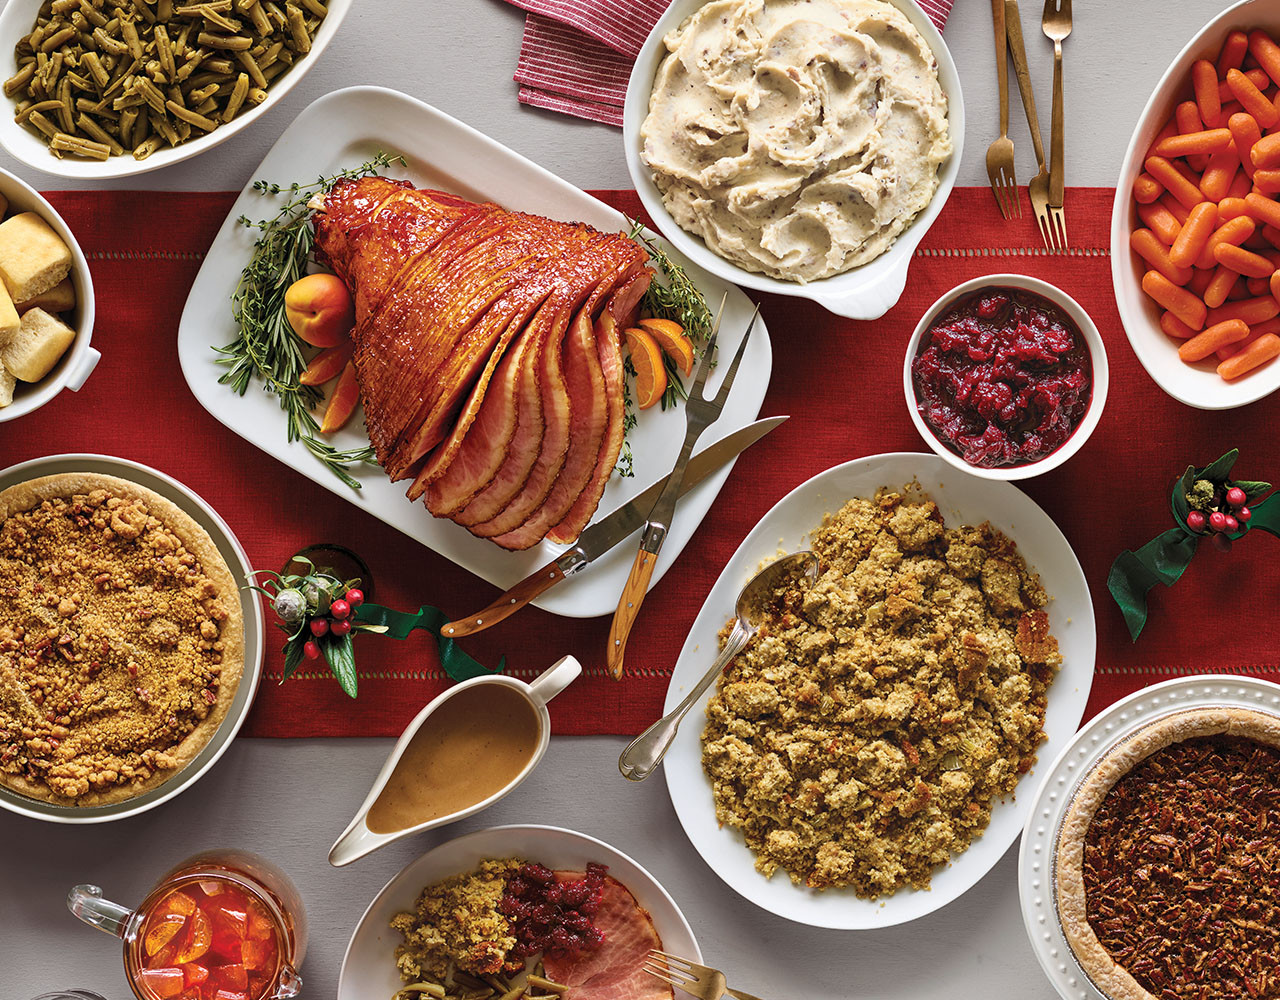 21 Ideas for Cracker Barrel Christmas Dinners to Go – Most Popular ...